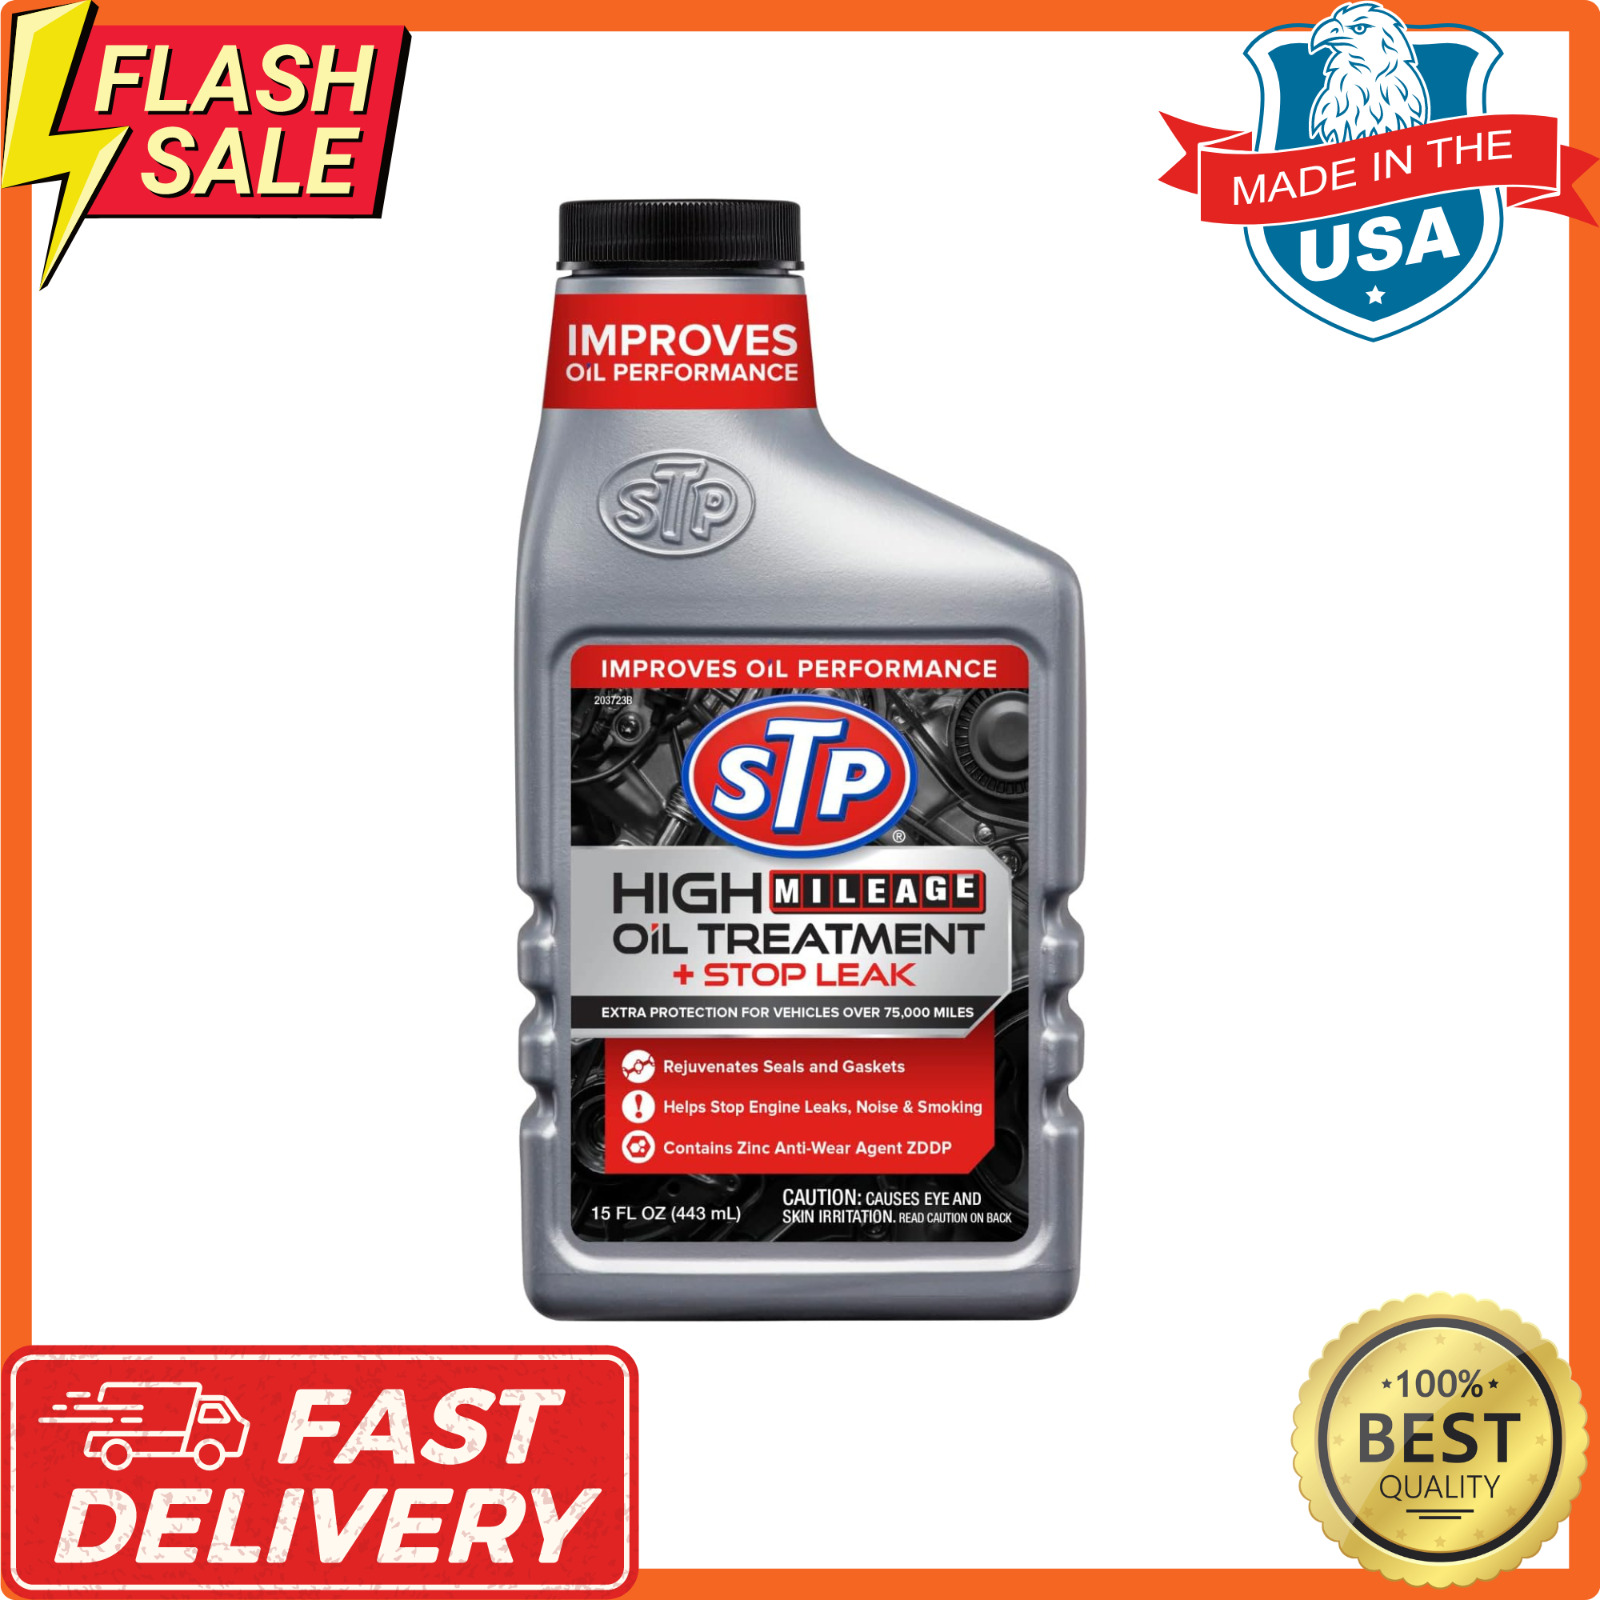 STP High Mileage Oil Treatment + Stop Leak - 15 FL OZ New Fast Delivery